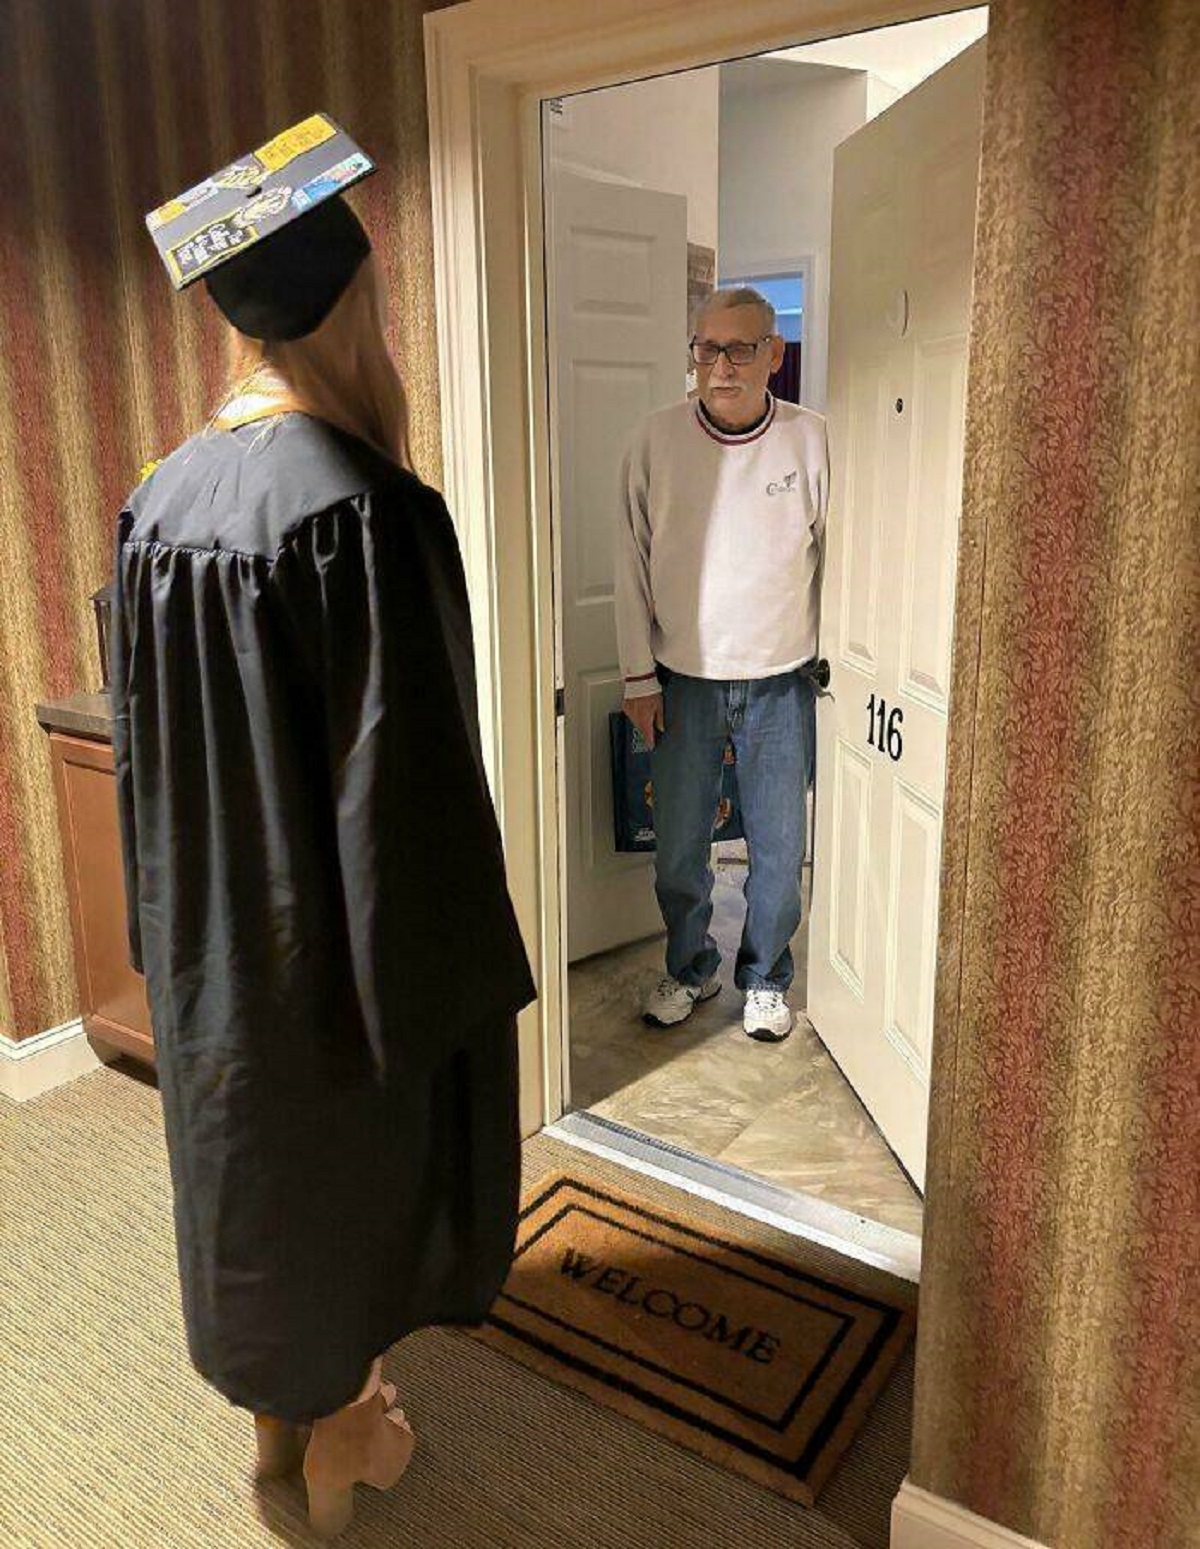 "My Grandpa Was Too Sick To Attend My College Graduation, So I Surprised Him At His House After The Ceremony"